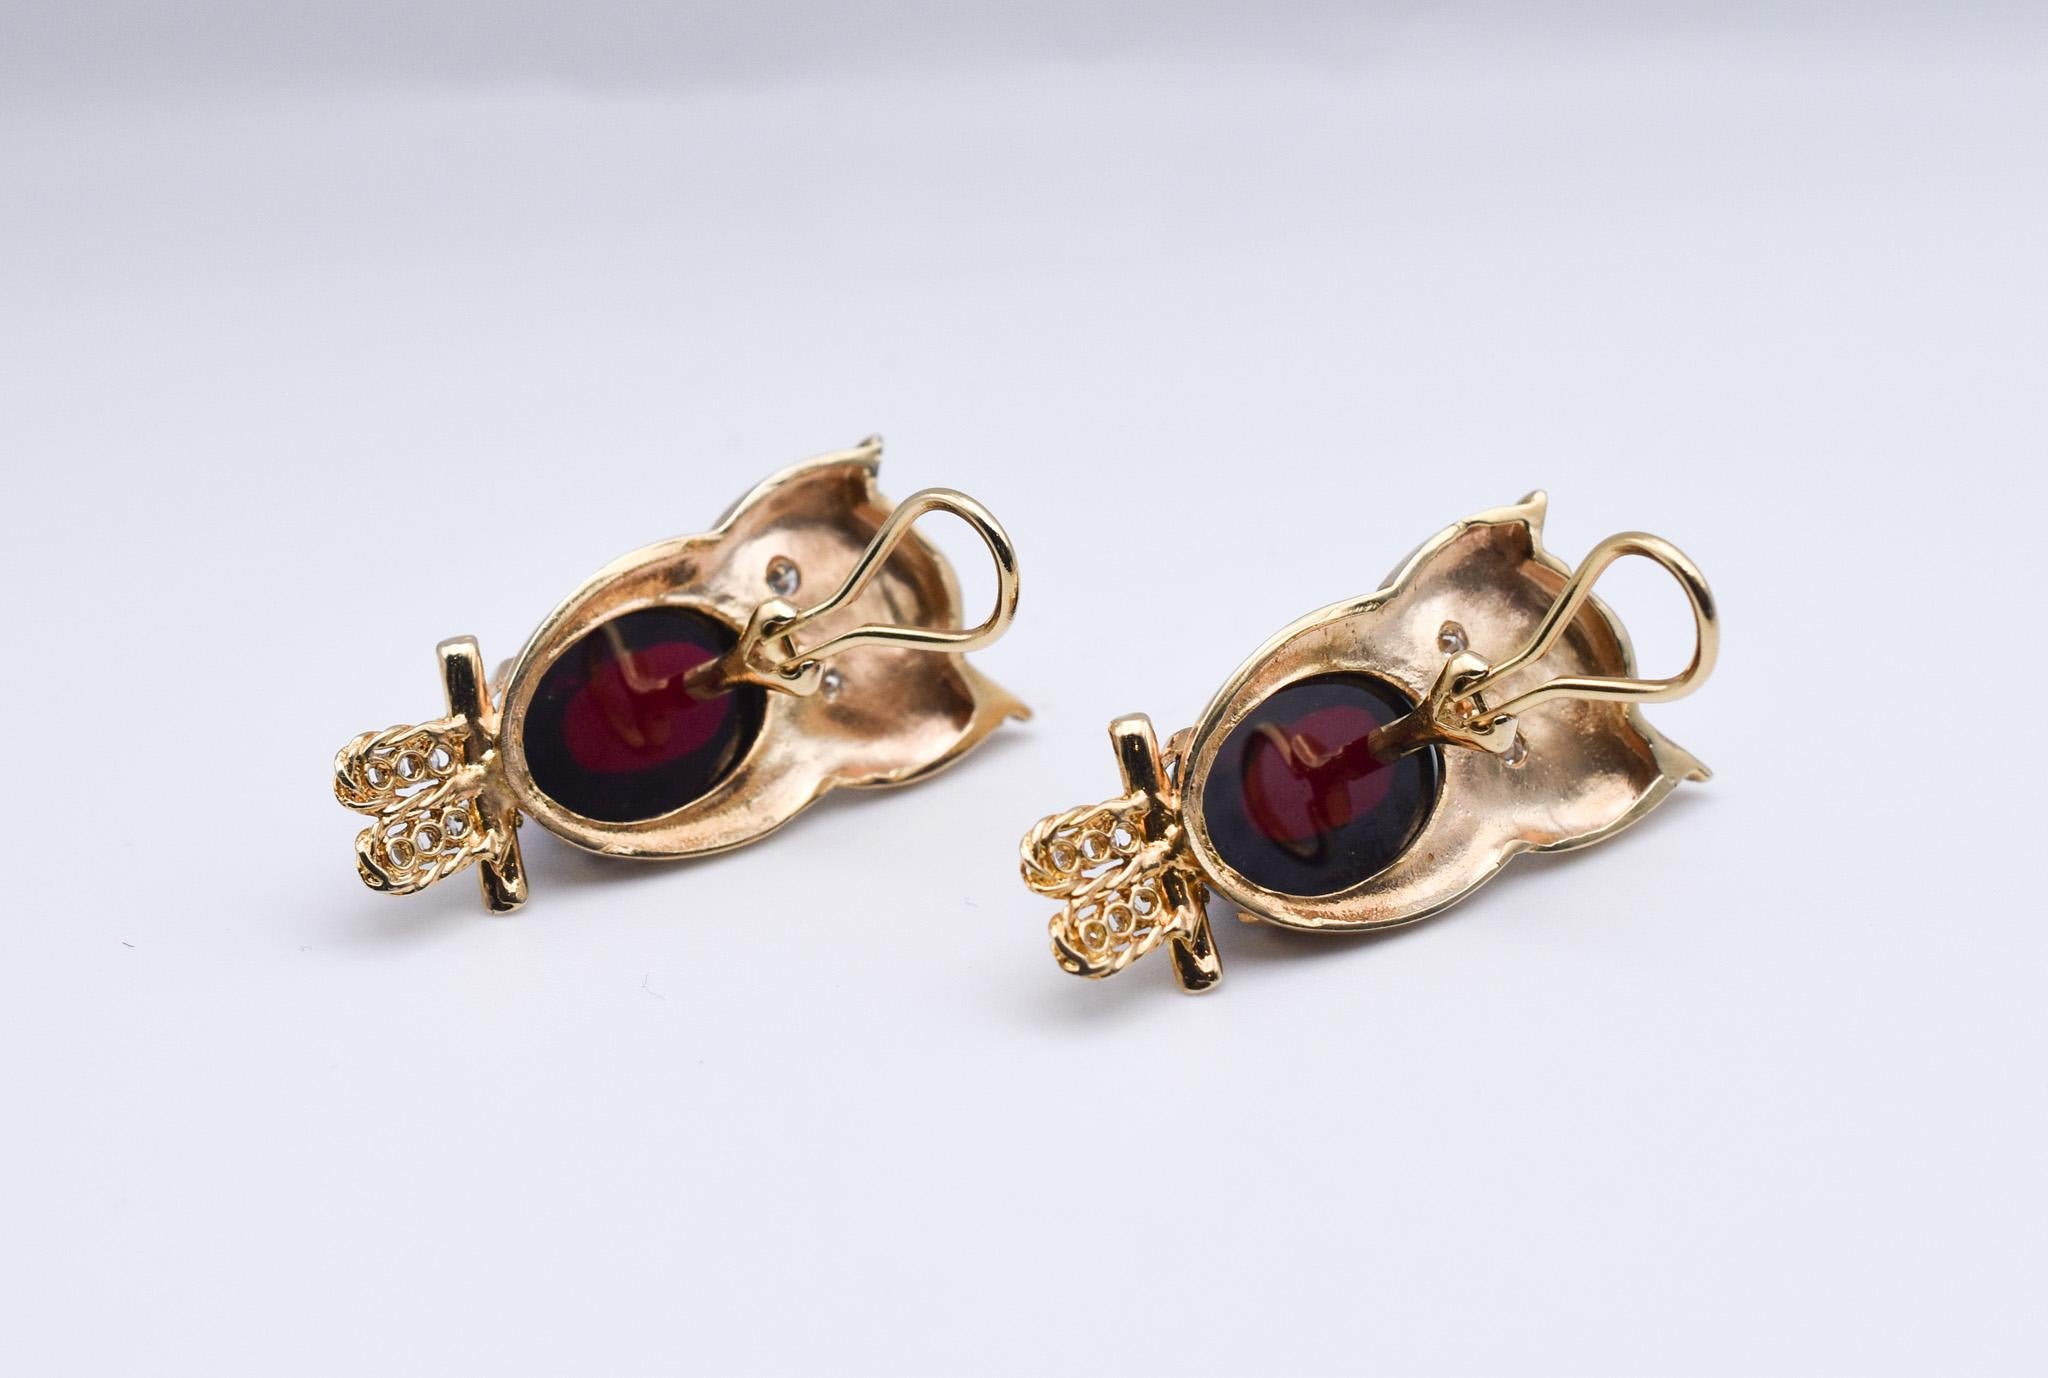 An exquisite pair of Owl Earrings showcasing a Cabochon Garnet Tummy and Diamond Eyes and Feet. Made in America, circa 1950.